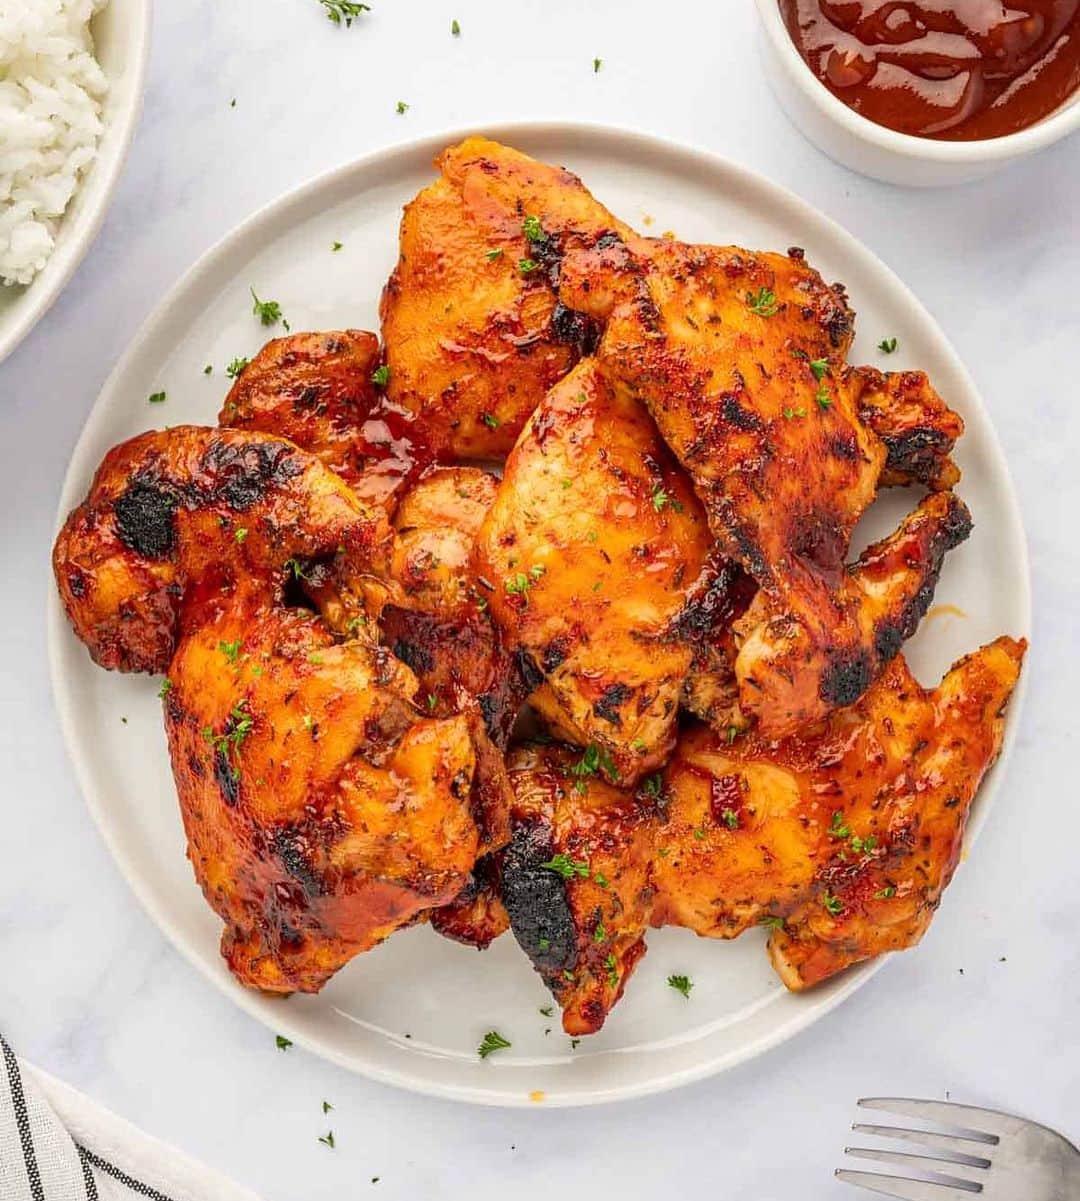 Easy Recipesのインスタグラム：「This simple-to-make barbecue chicken thighs recipe is an absolute game-changer for every family, especially on those crazy busy nights when you just need something easy and delicious on the table.  Full recipe link in my bio @cookinwithmima  https://www.cookinwithmima.com/baked-bbq-chicken-thighs/」